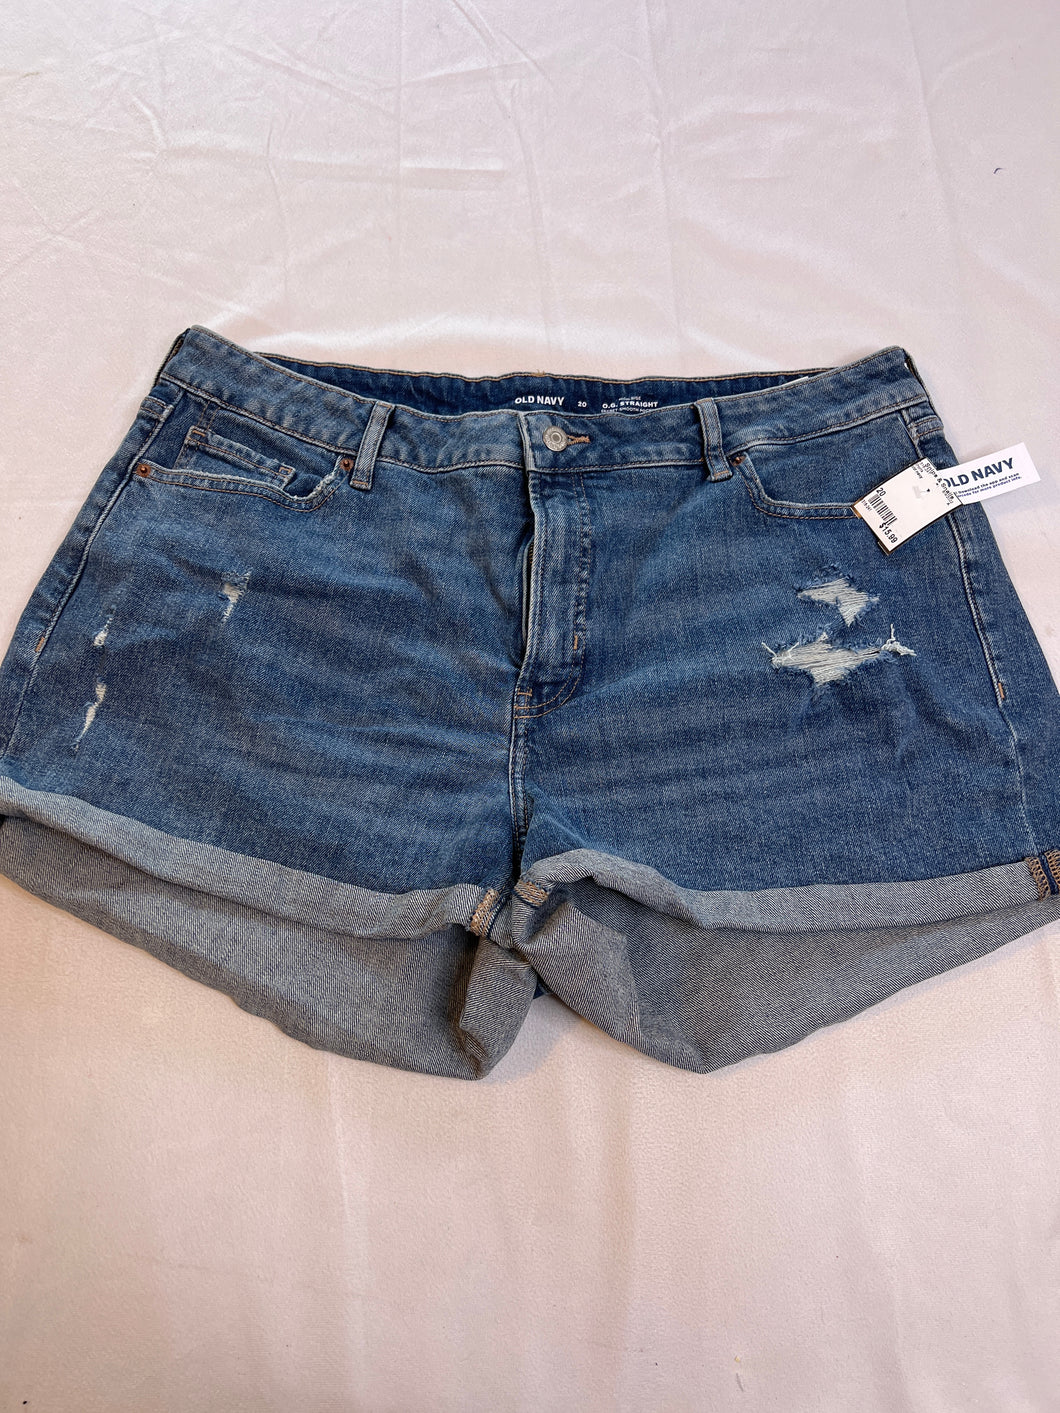 Womens BNWT Size 20 old navy Shorts